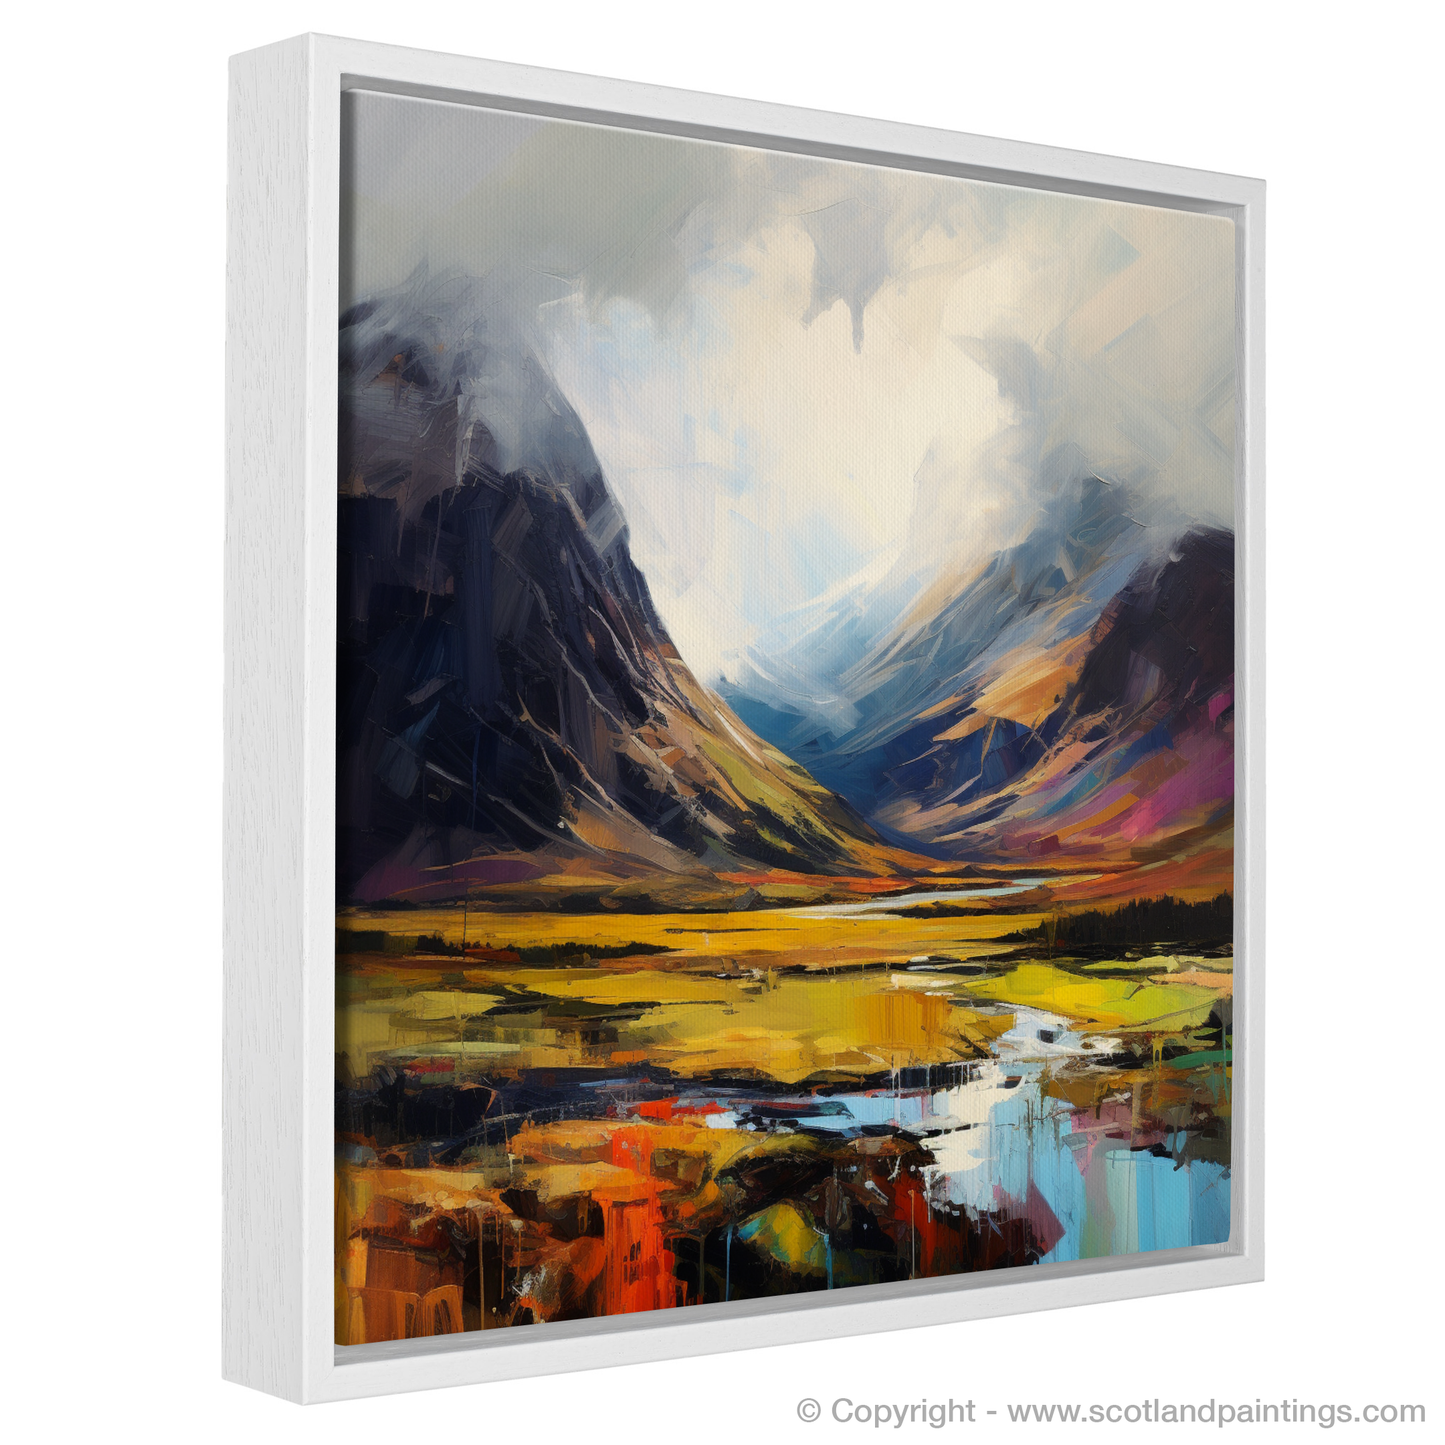 Painting and Art Print of Ben Nevis, Highlands. Highland Majesty: An Expressionist Tribute to Ben Nevis.